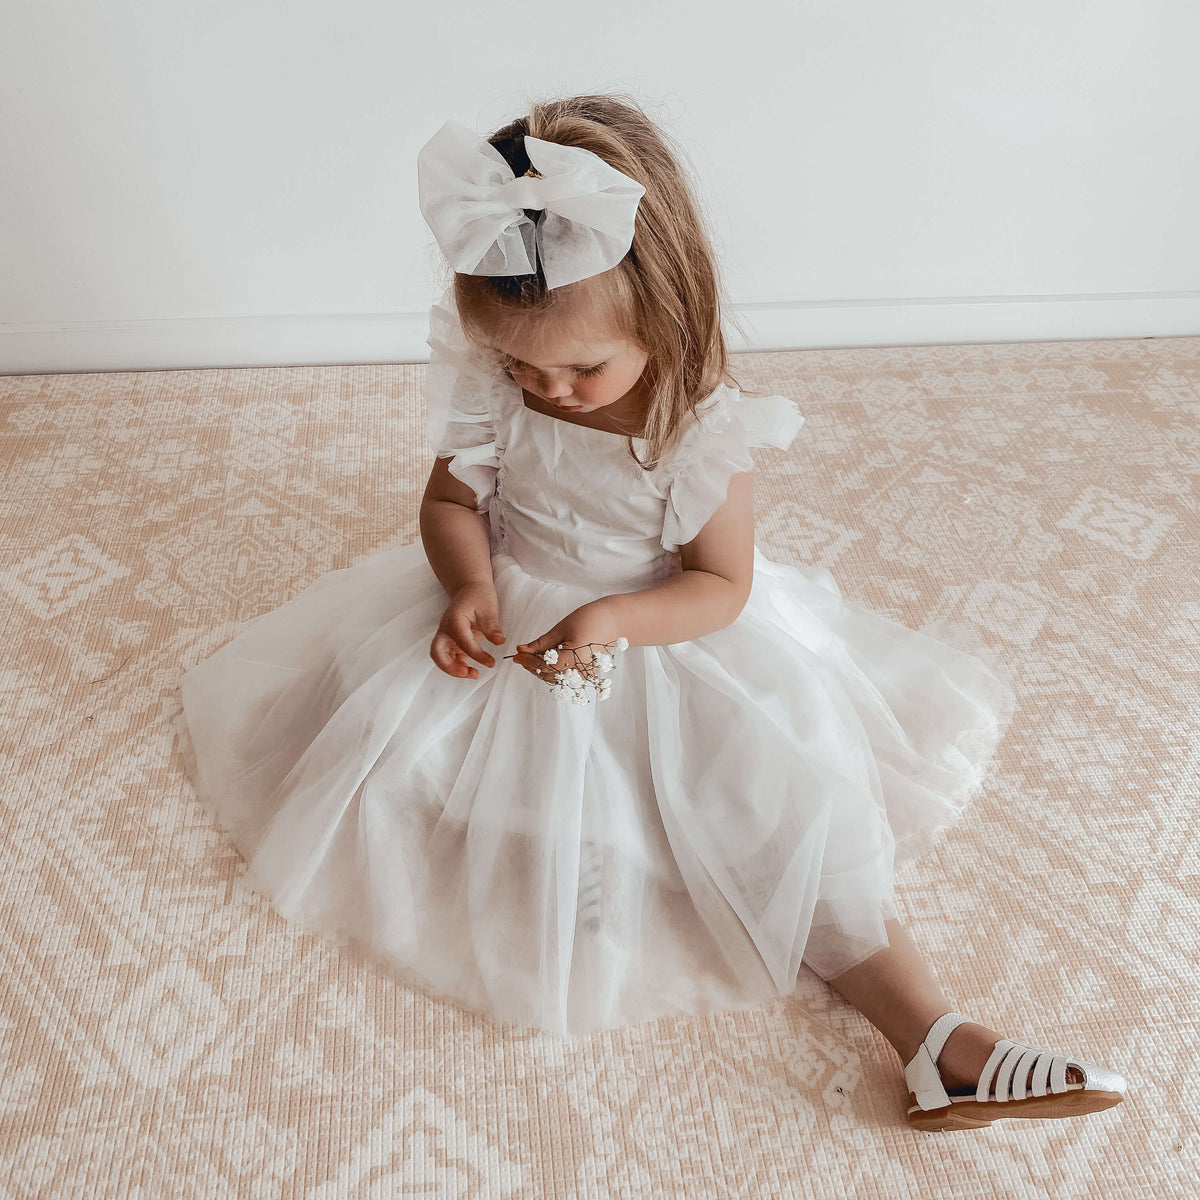 Gigi flower girl dress and tulle bow is worn by a young girl who sits on the floor holding some flowers.